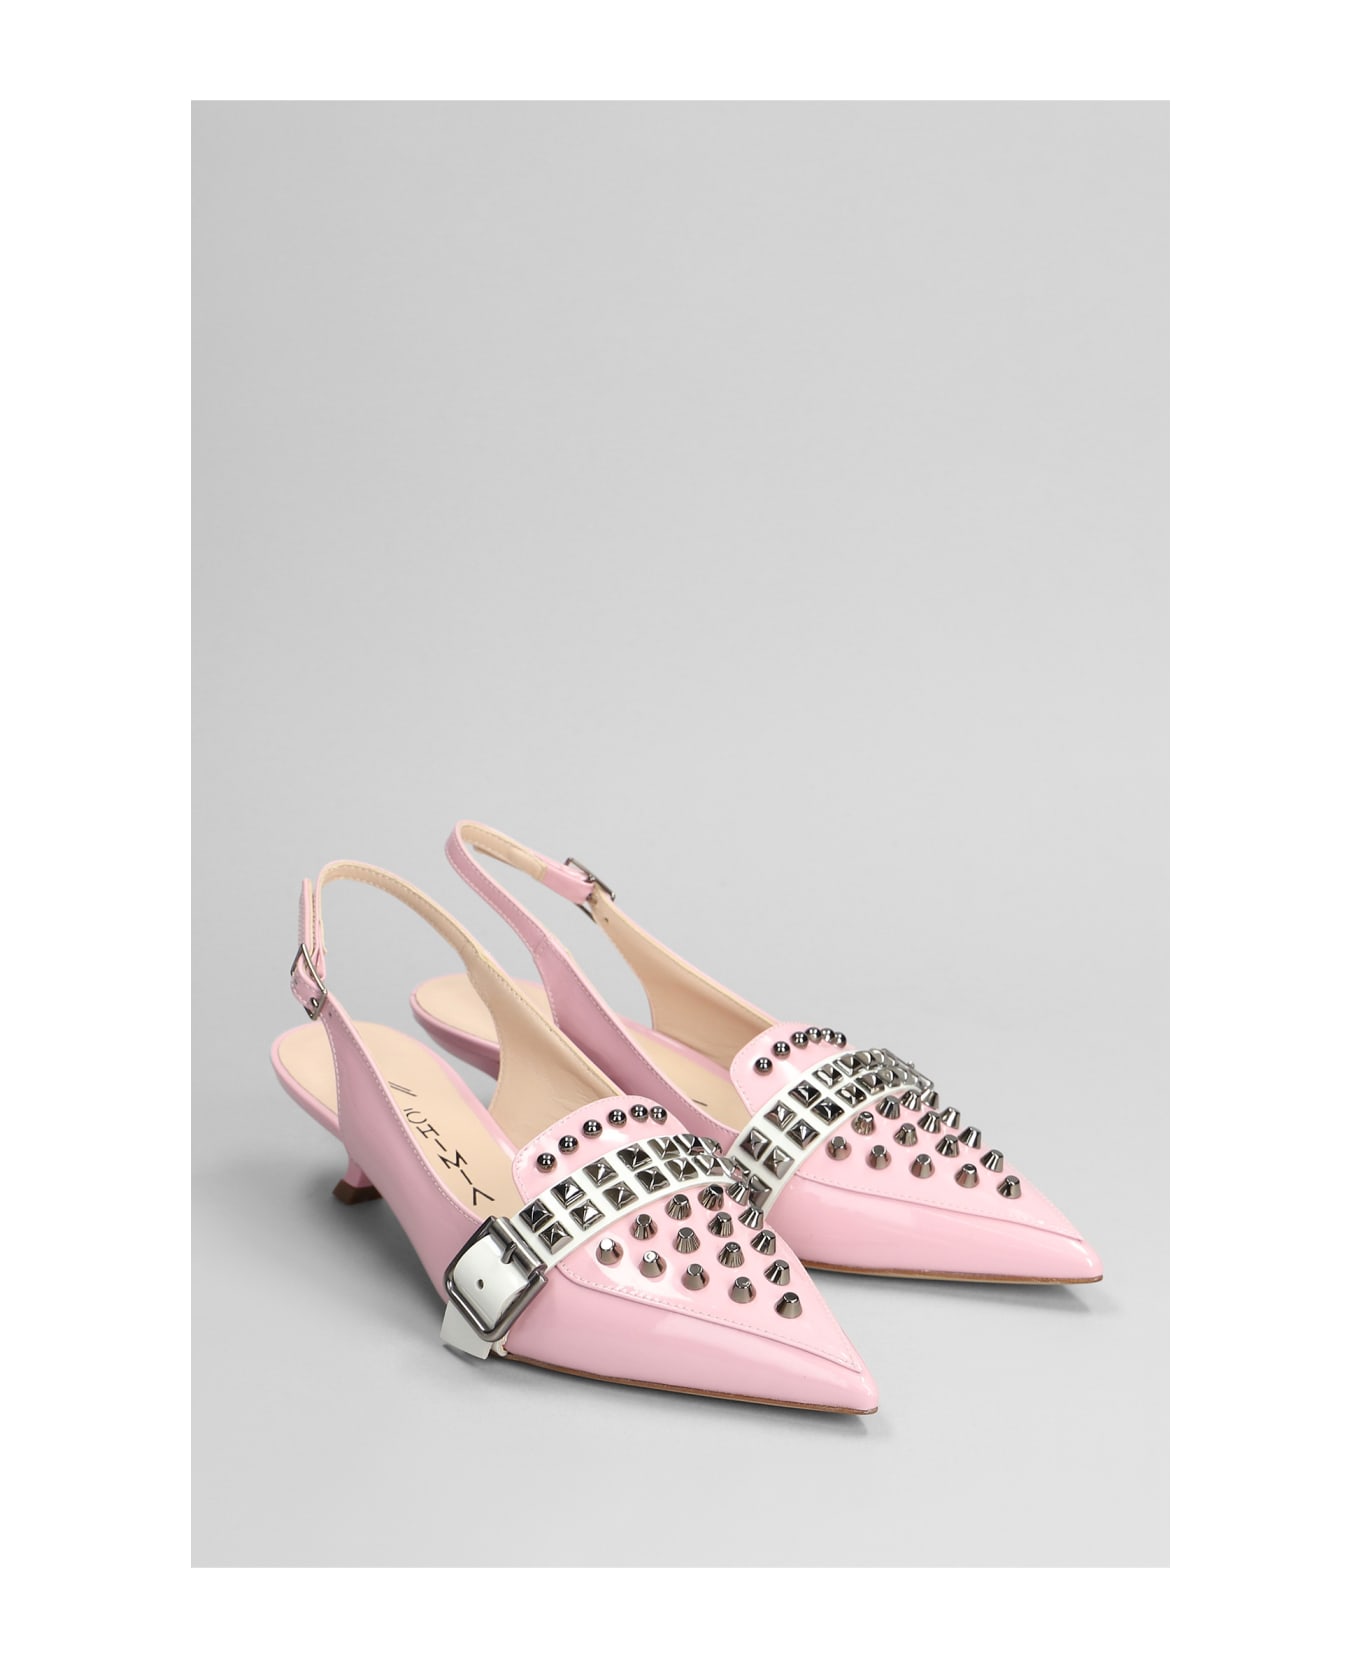 Alchimia Pumps In Rose-pink Patent Leather - rose-pink